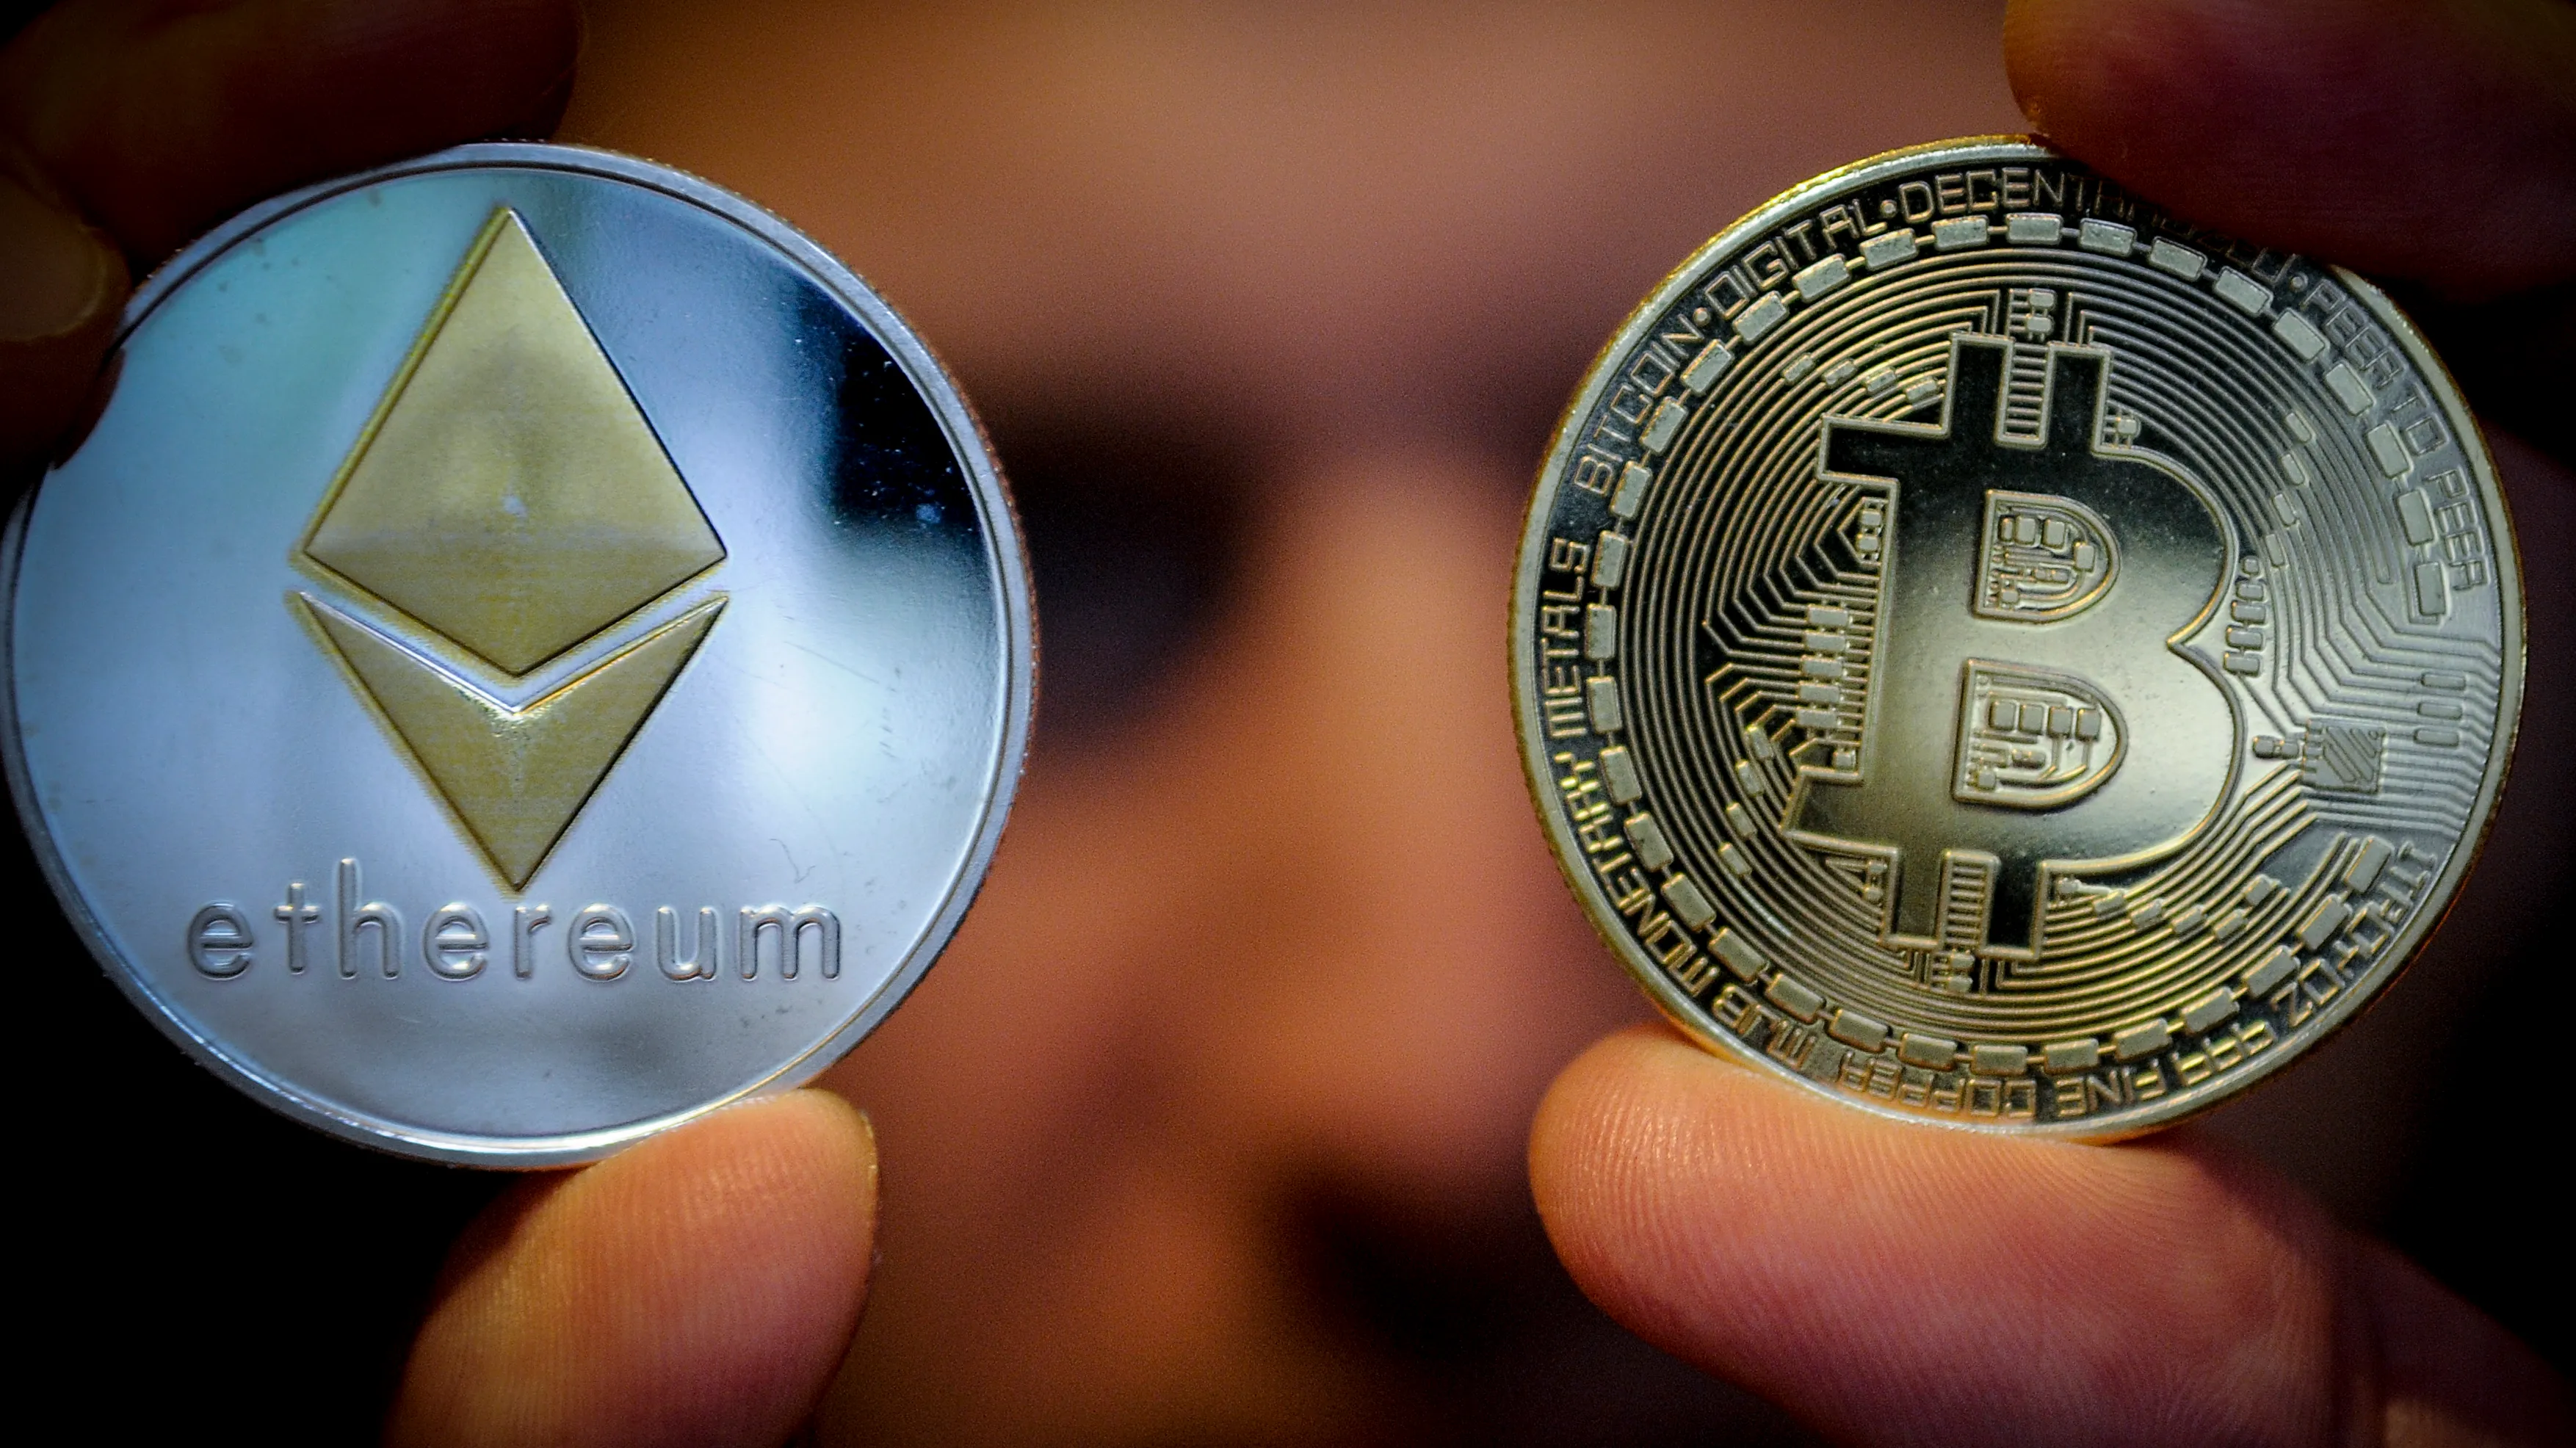 Bitcoin vs Ethereum: What’s the difference? - NerdWallet